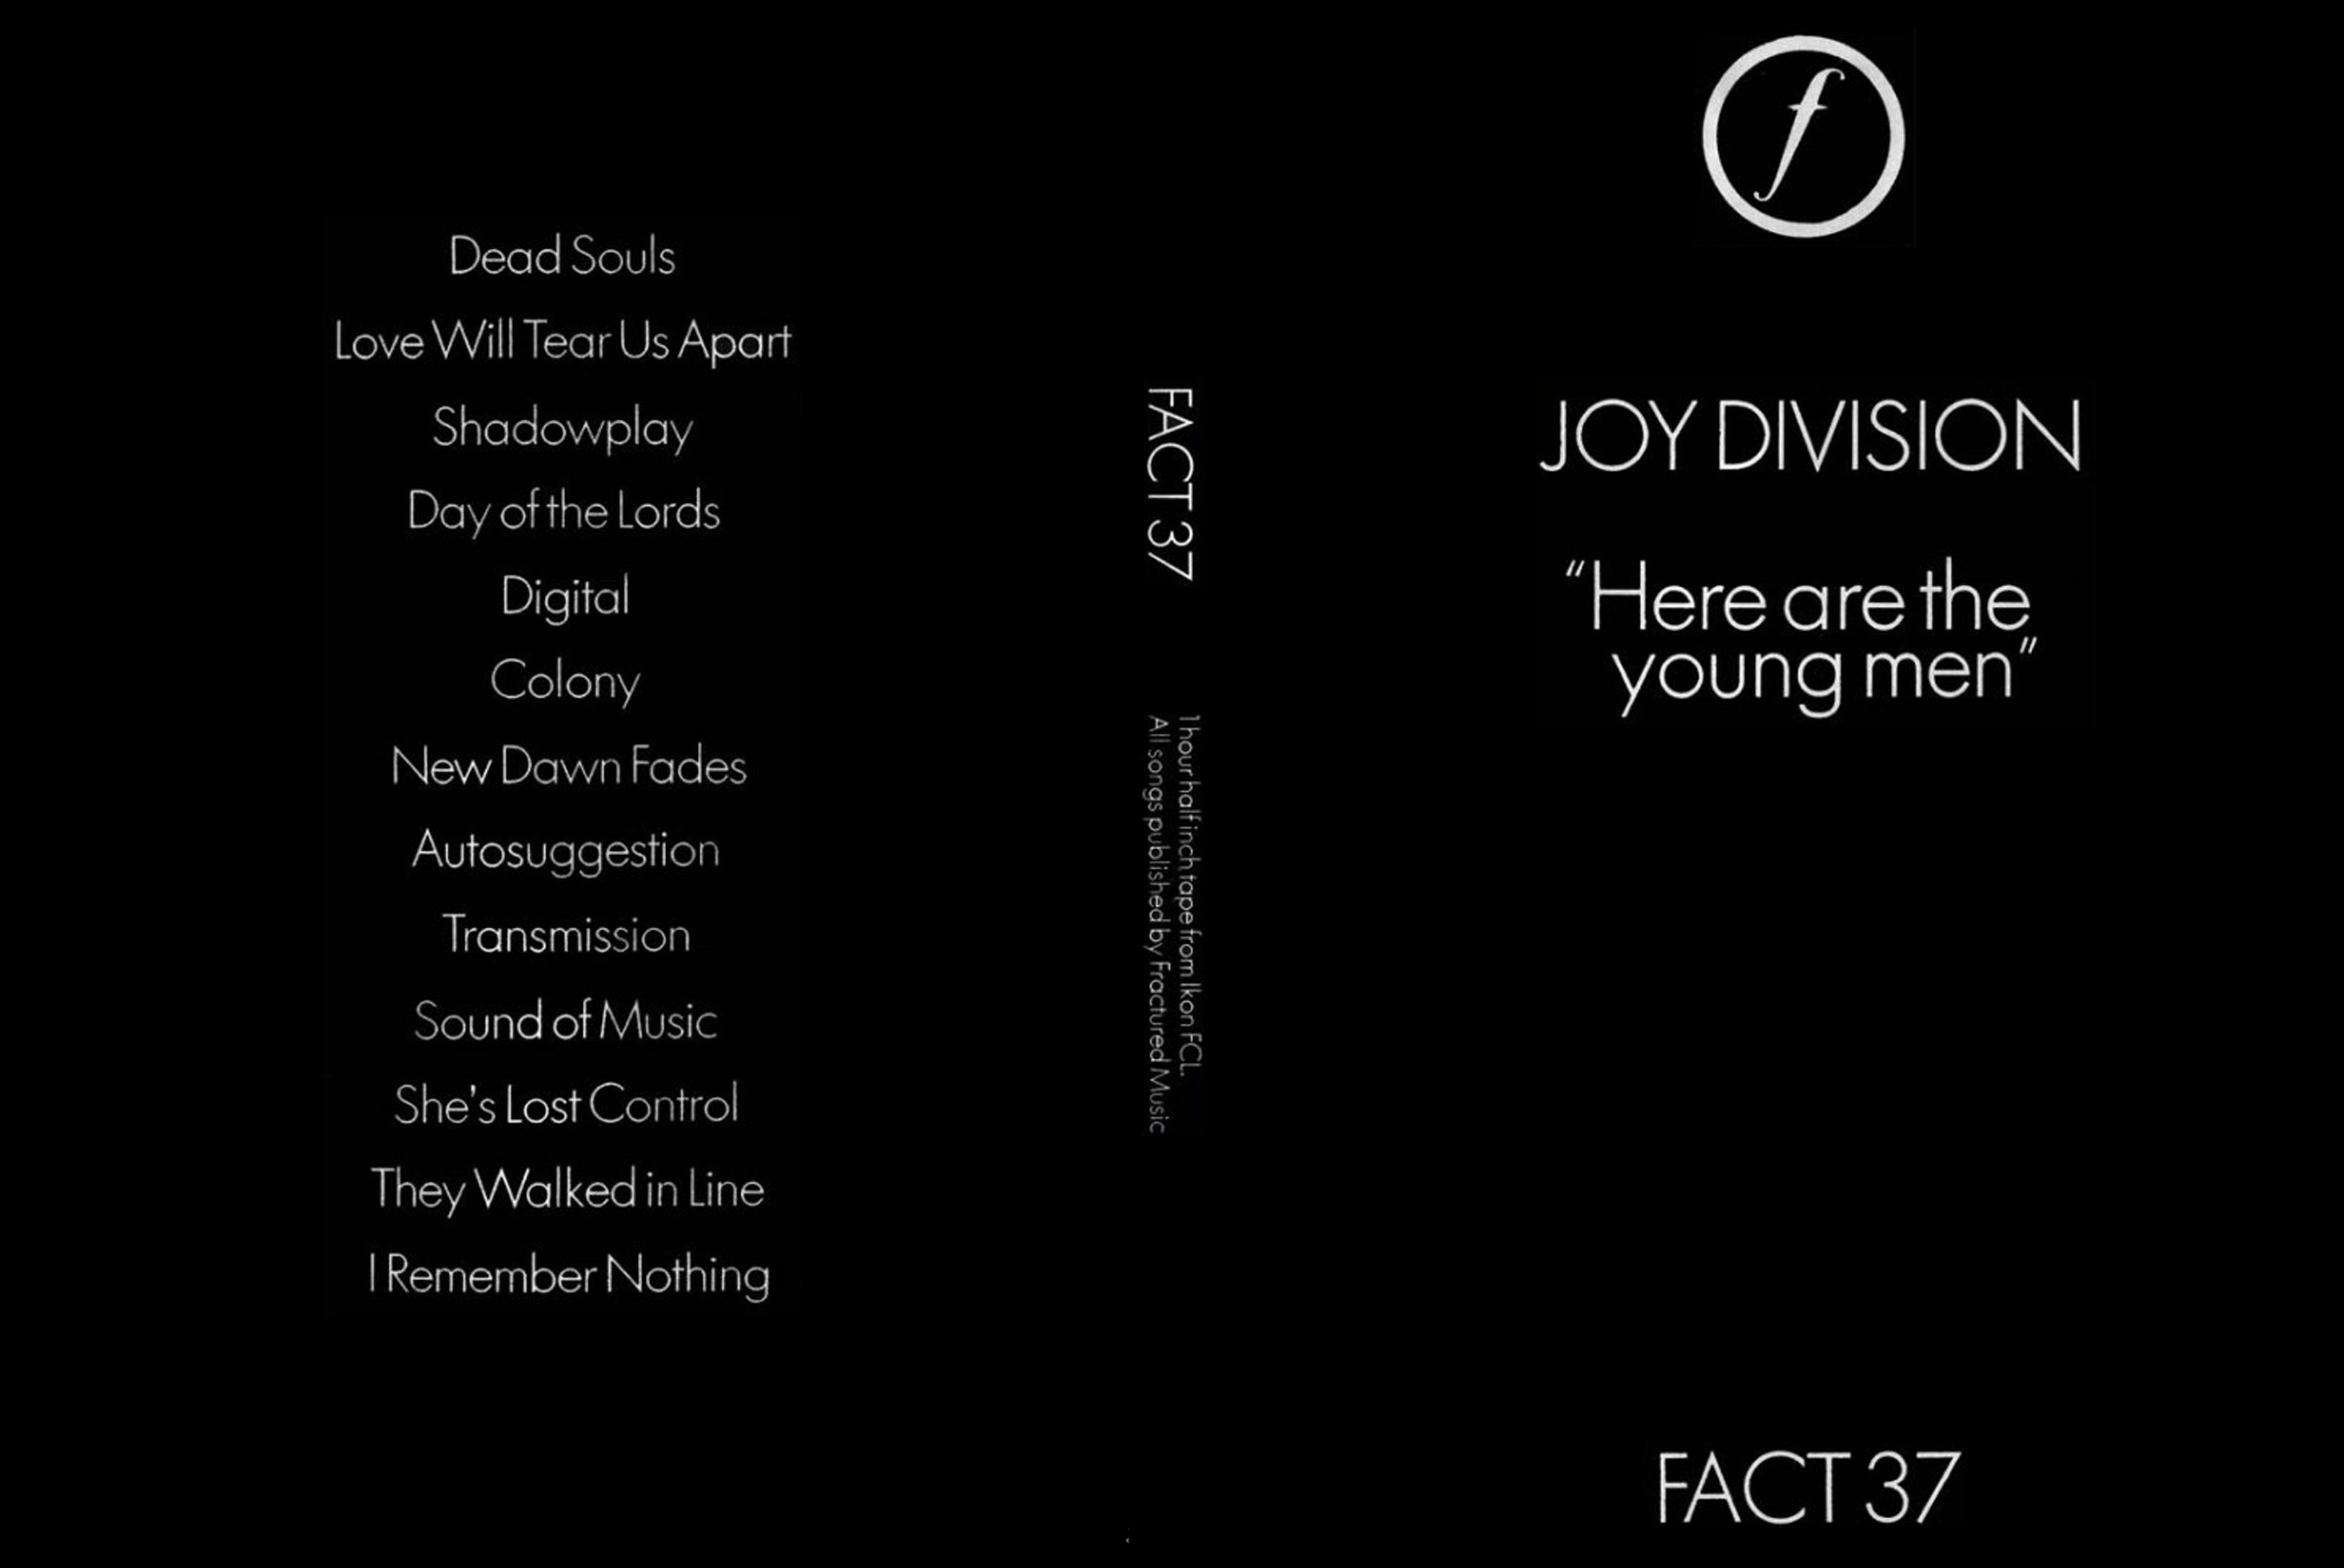 Jaquette DVD Joy Division - Here are the young men